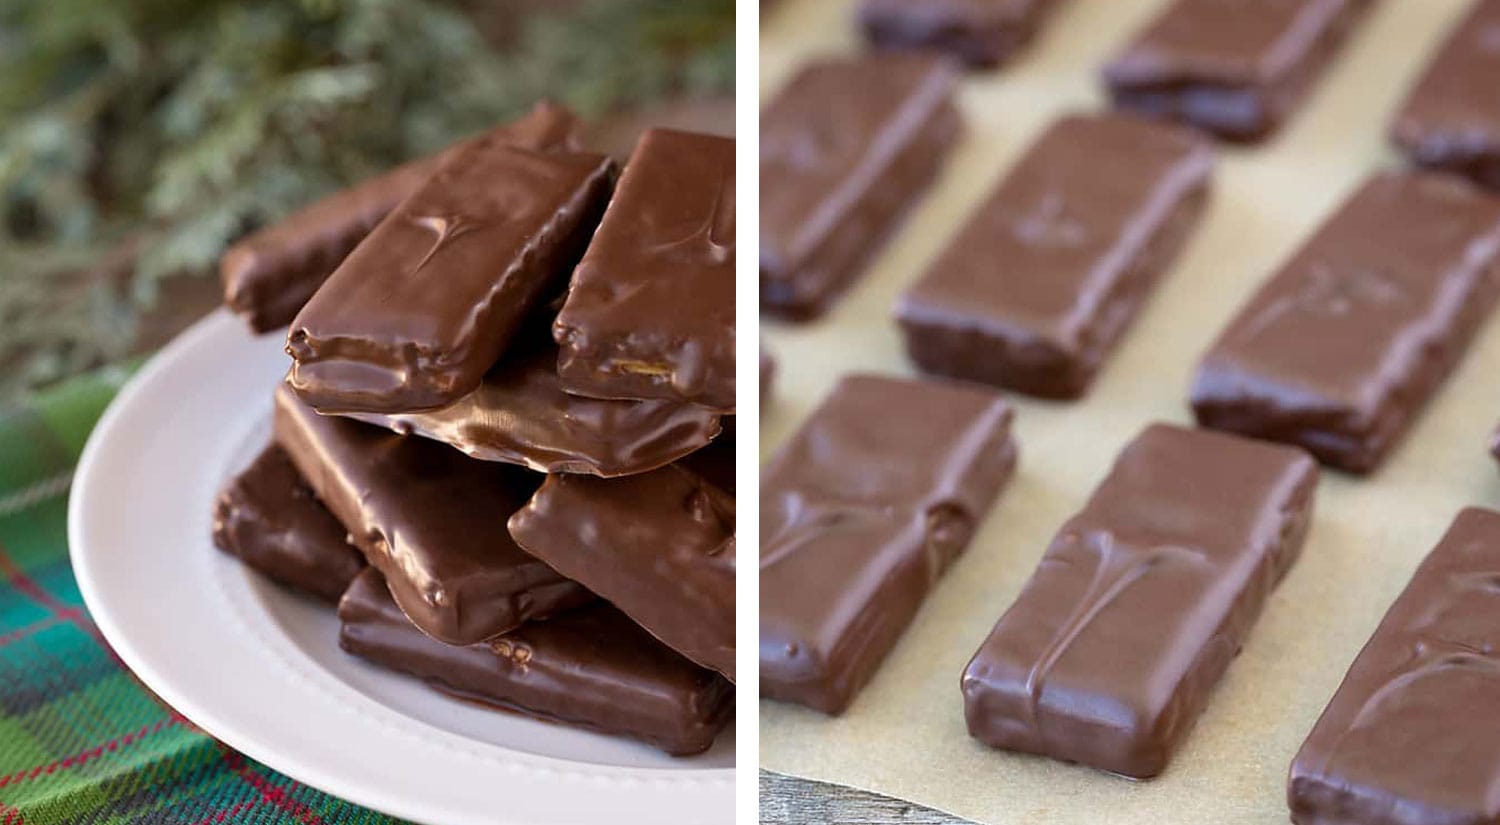 The combination of chocolate, peanut butter and graham crackers makes a delicious homemade candy bar